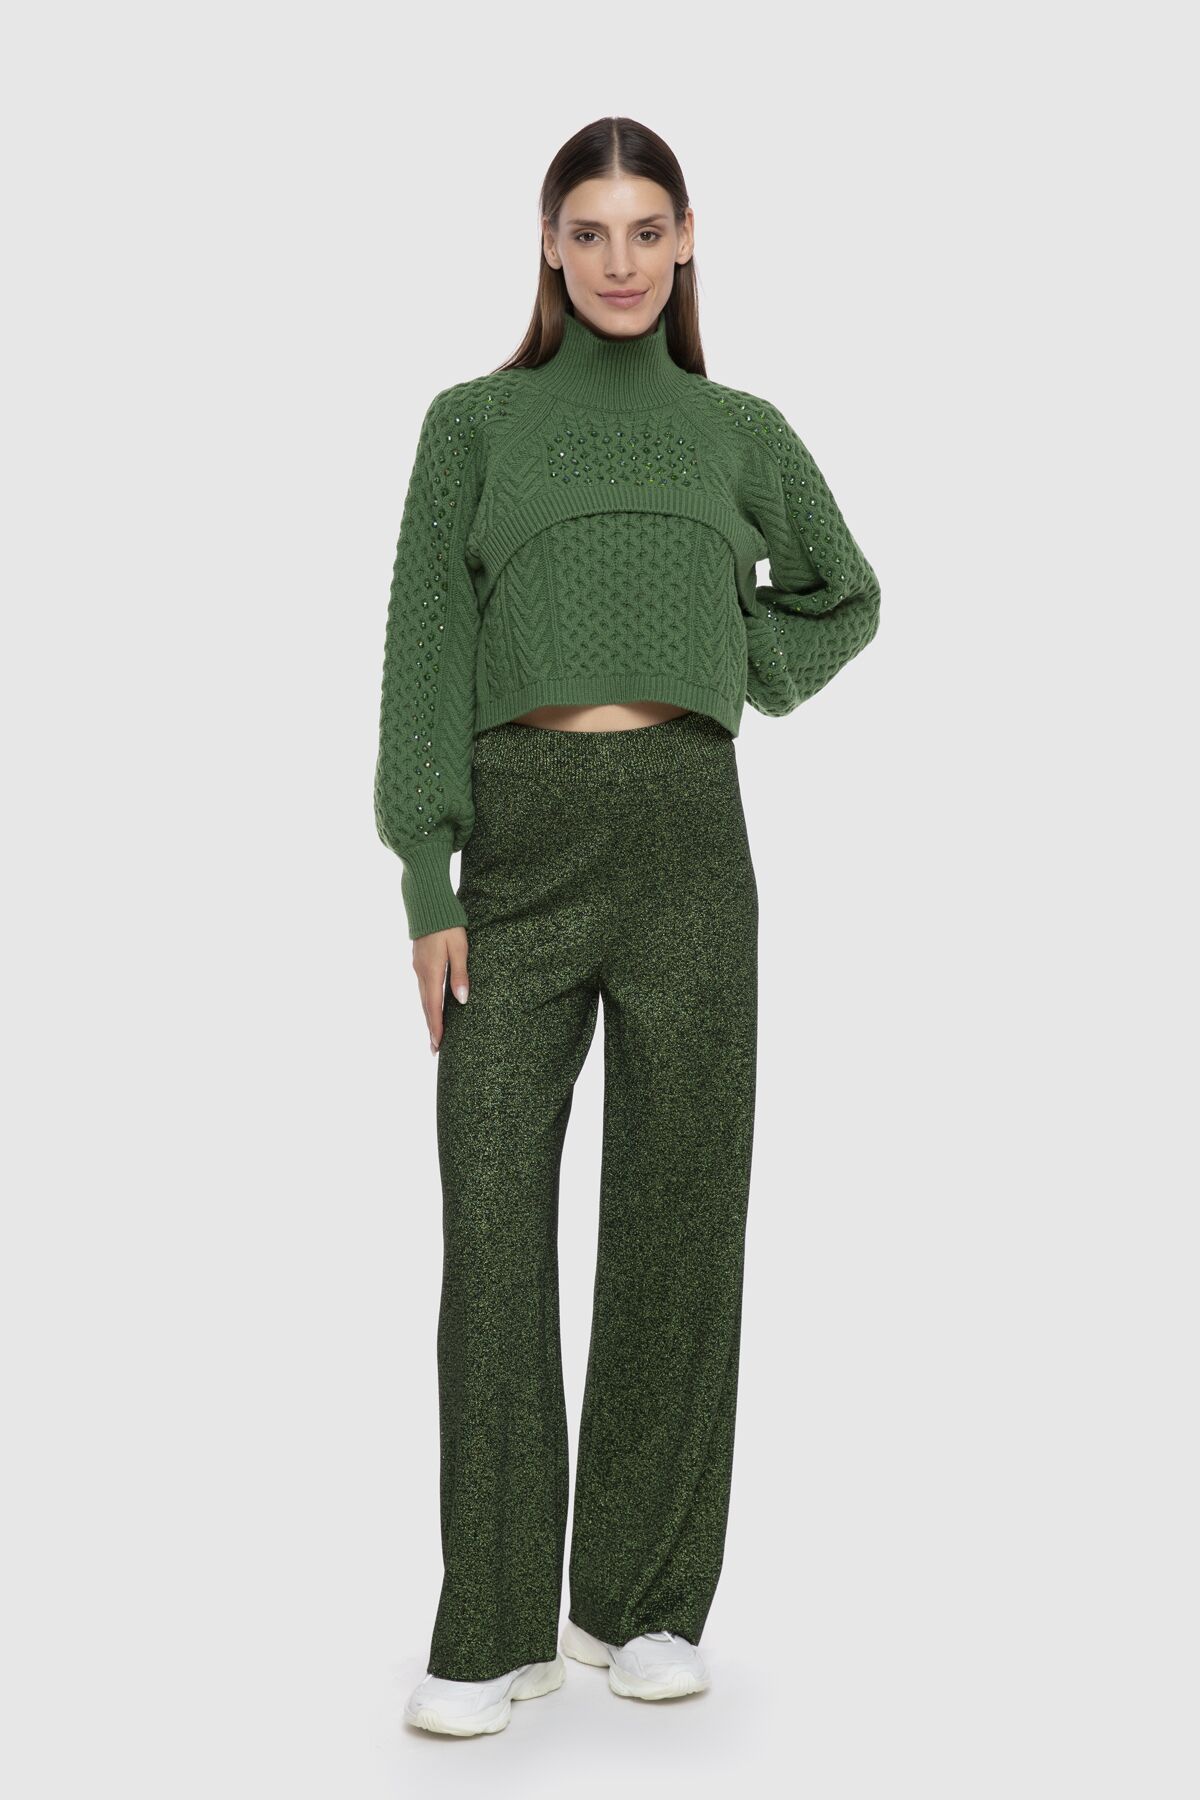  GIZIA - Two Piece Bead Embroidered Green Knitwear Sweater